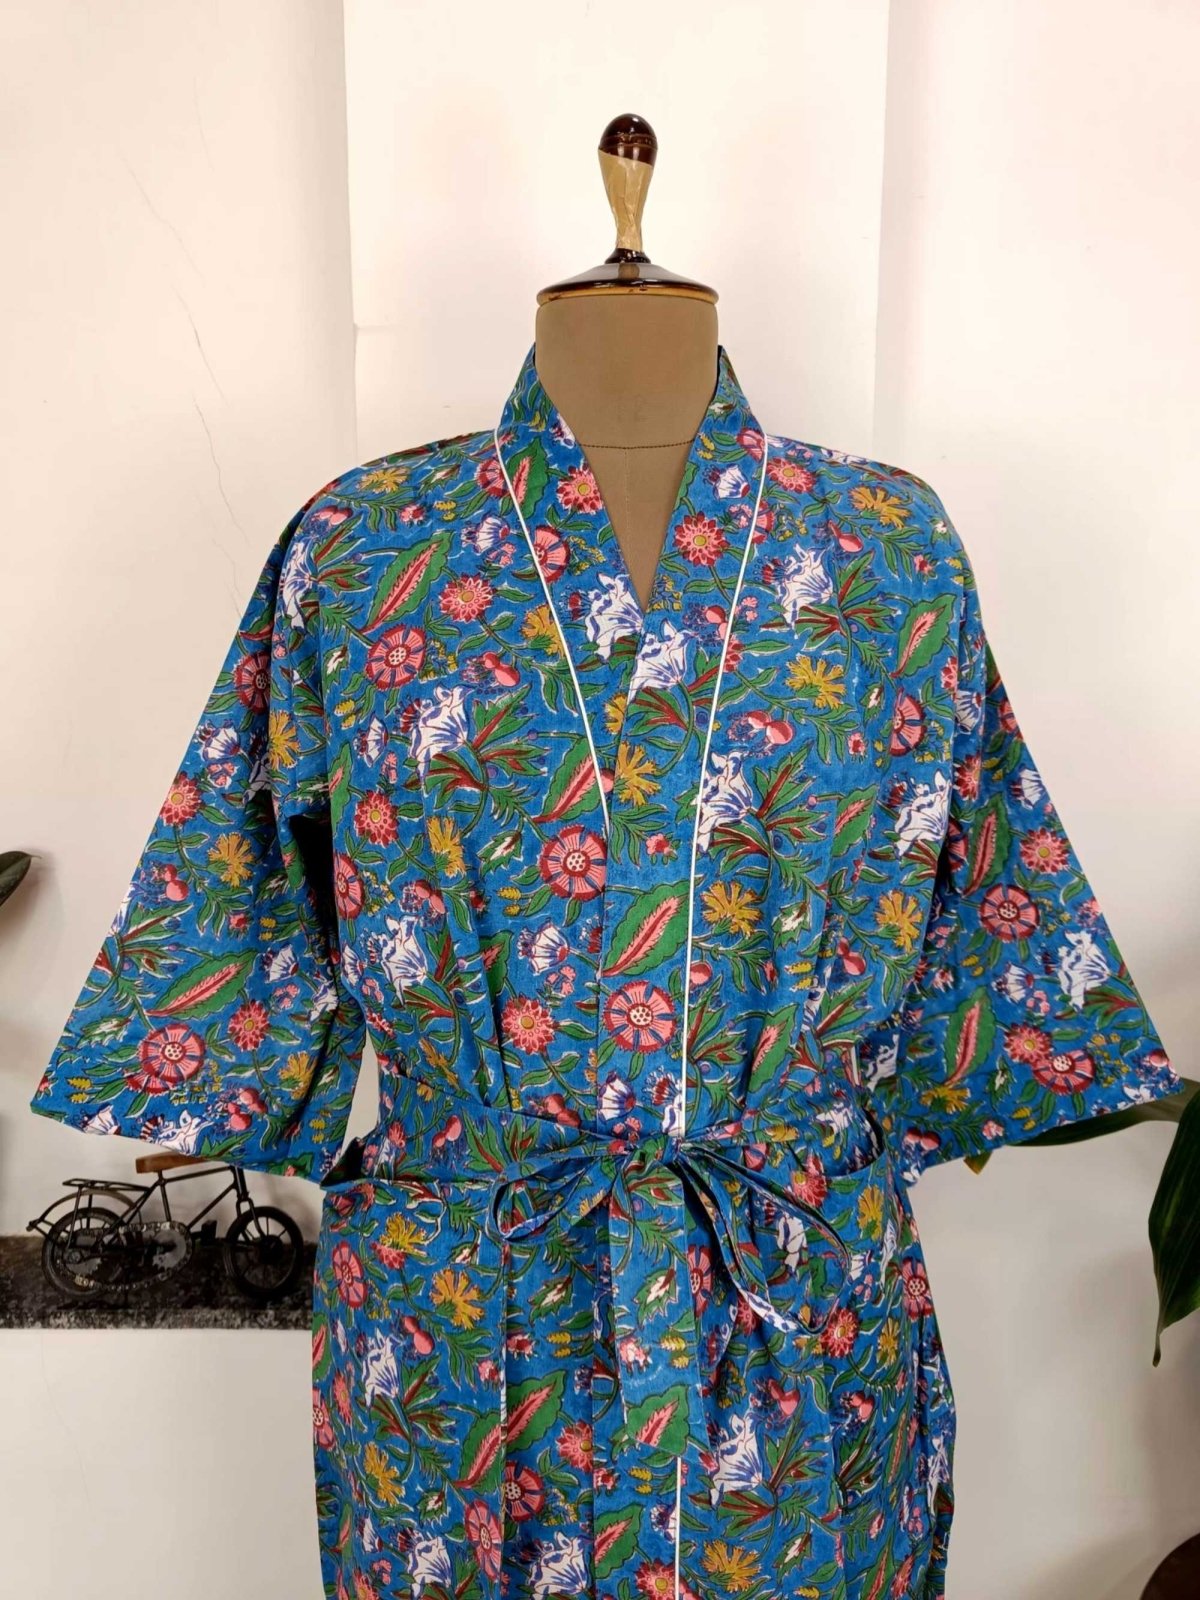 Pure Cotton Spring Summer Boho House Robe Kimono Indian Handblock Jaipur Indian Dress Blue Red floral Luxury Beach Holiday Wear Yacht Cover Up - The Eastern Loom